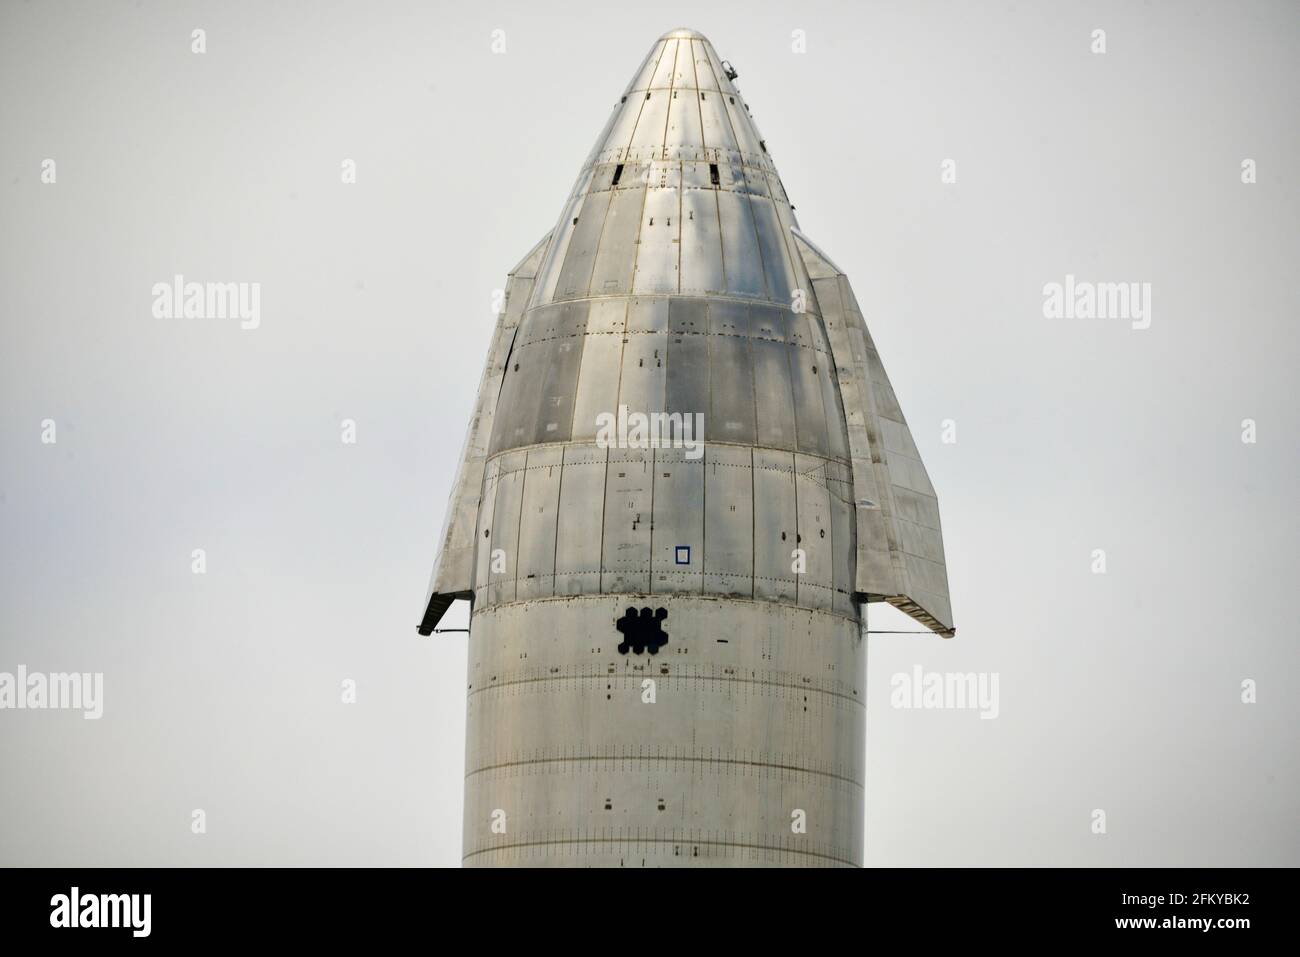 Starship at Spacex on launchpad Stock Photo